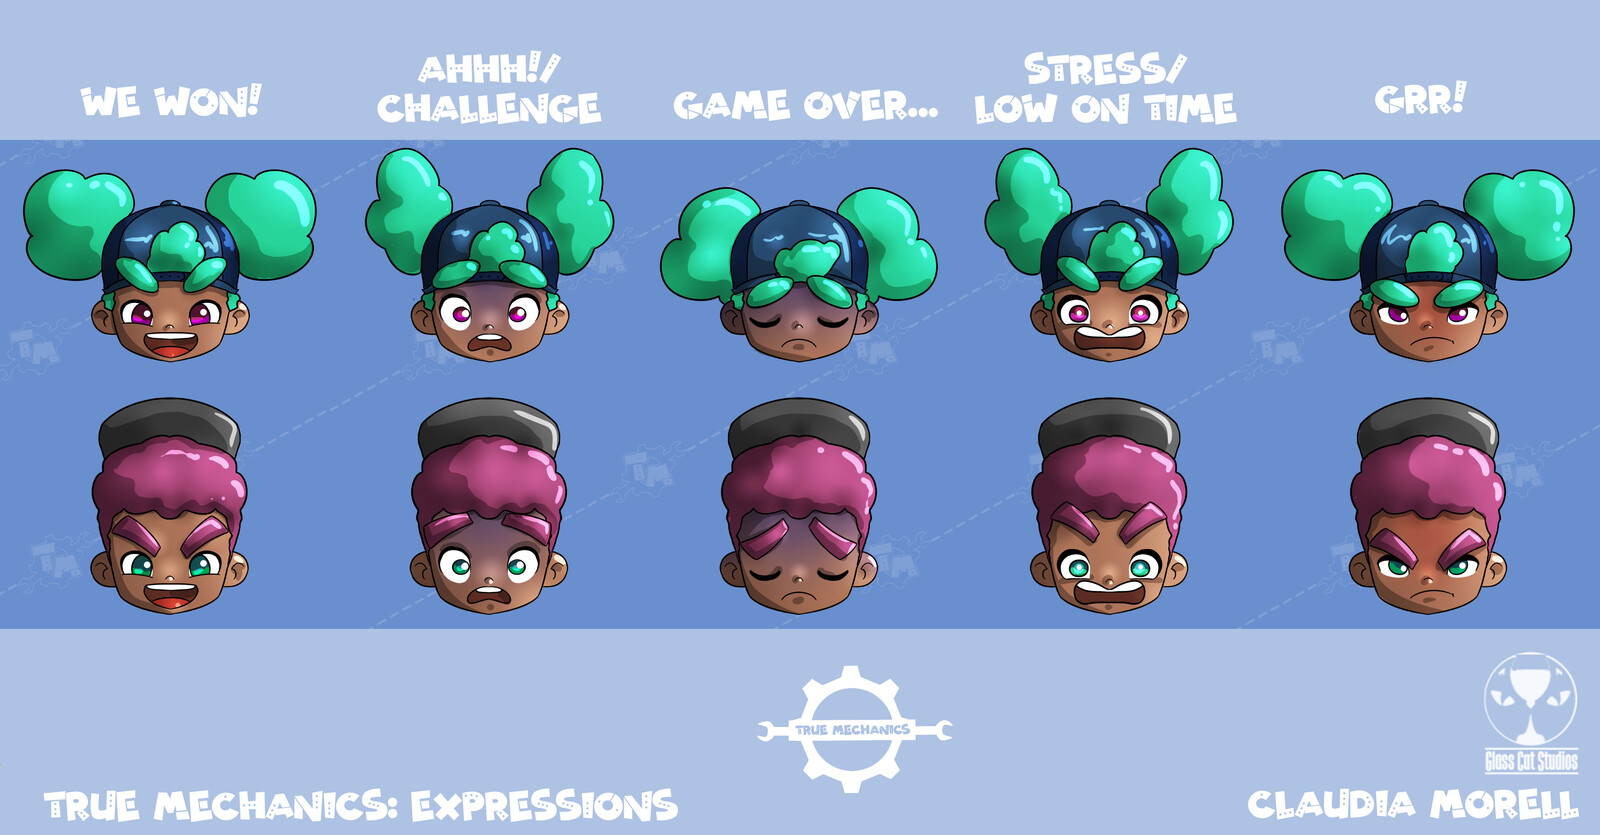 Expressions. As of now, both characters  have the same facial expressions. If we are able to have more, I will update the sheet so they are more unique!